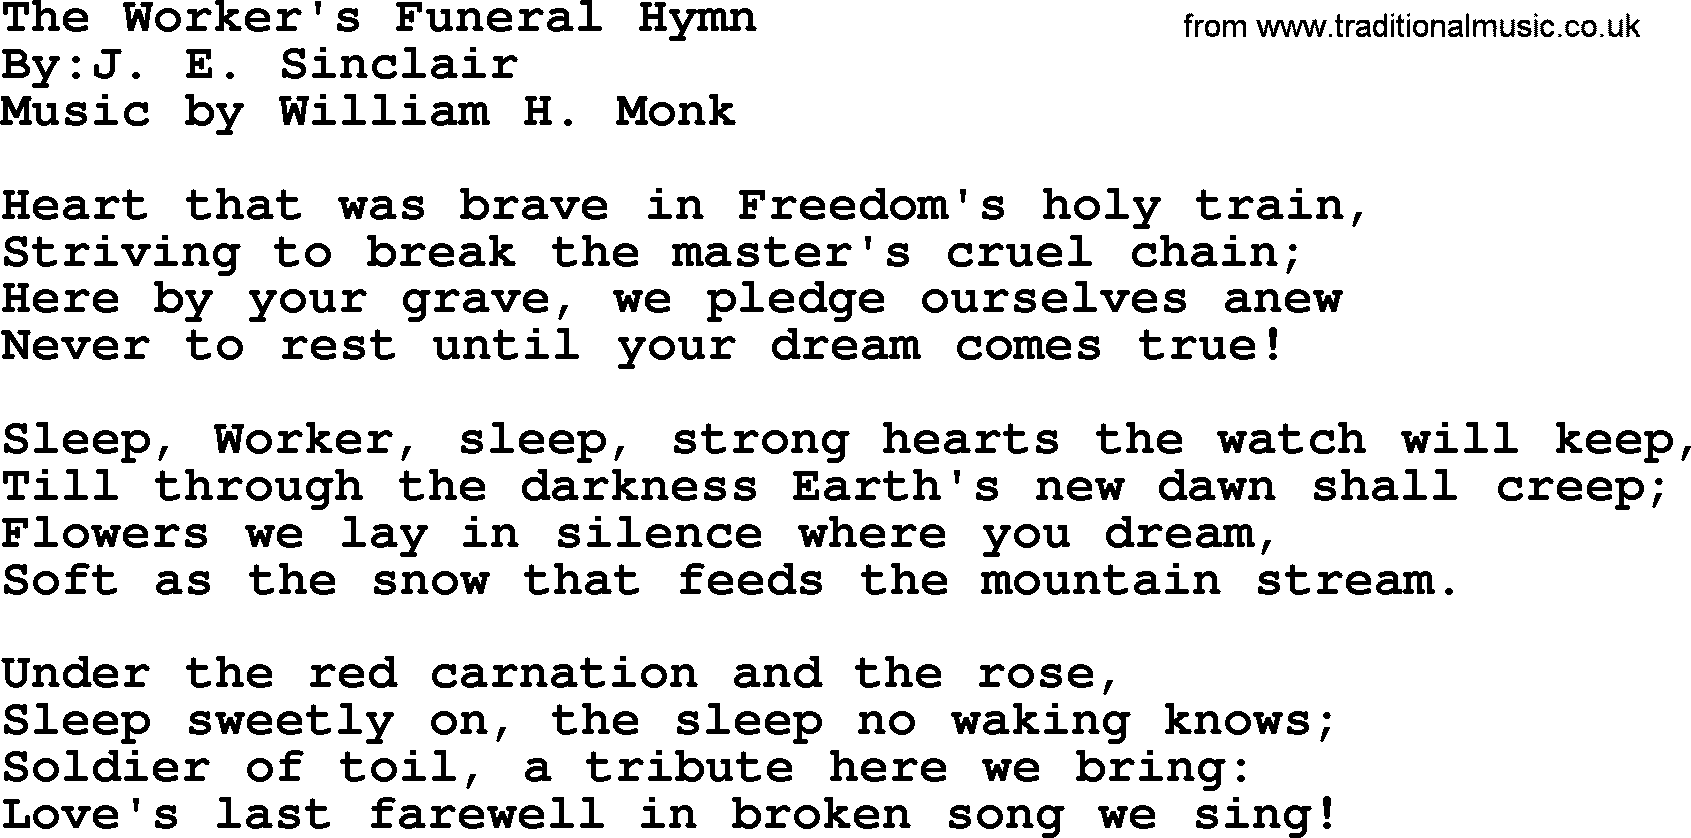 Political, Solidarity, Workers or Union song: The Workers Funeral Hymn, lyrics